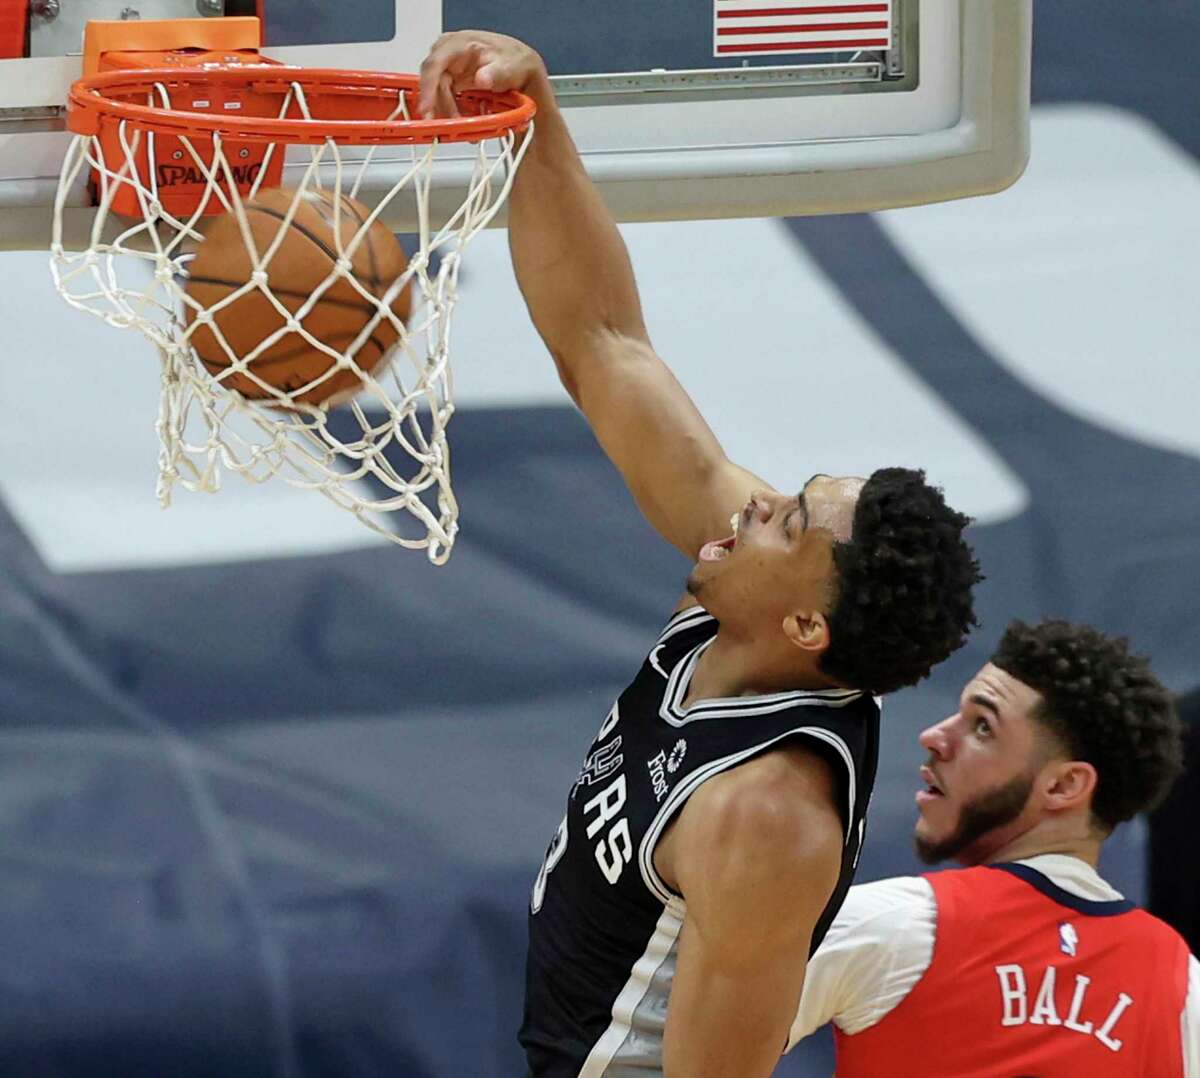 Spurs forward Keldon Johnson (3) dunks the ball as Pelicans guard Lonzo Ball (2) defends in the first half of an NBA basketball game in New Orleans, Saturday, April 24, 2021.